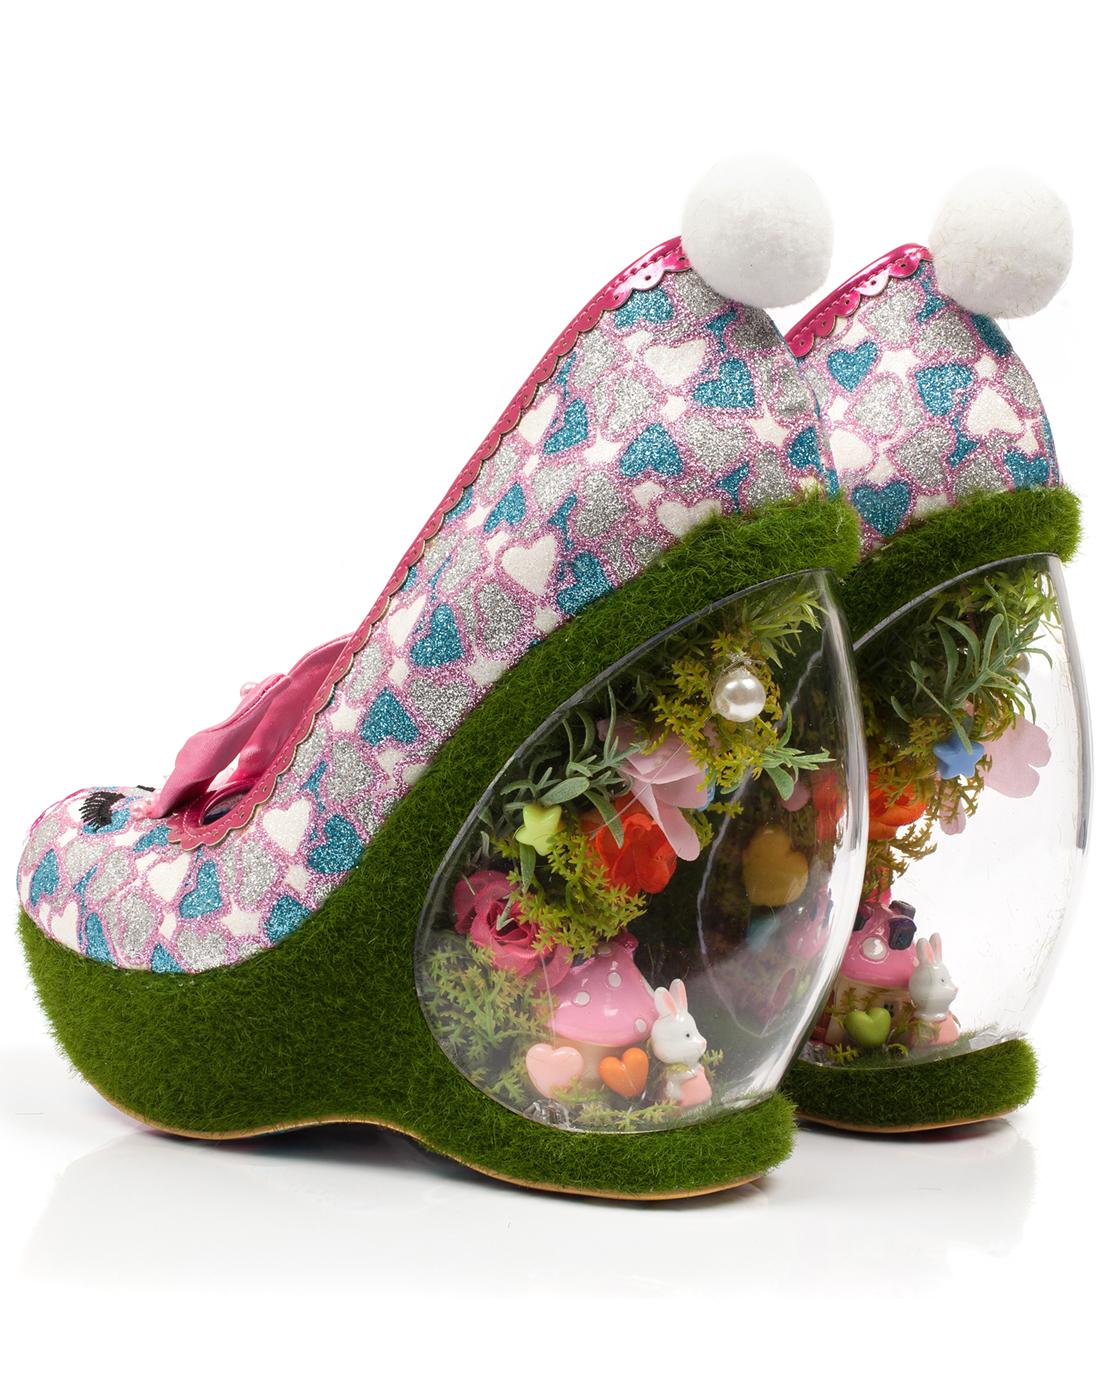 IRREGULAR CHOICE Hop To It Ltd Ed Bunny Shoes in Pink